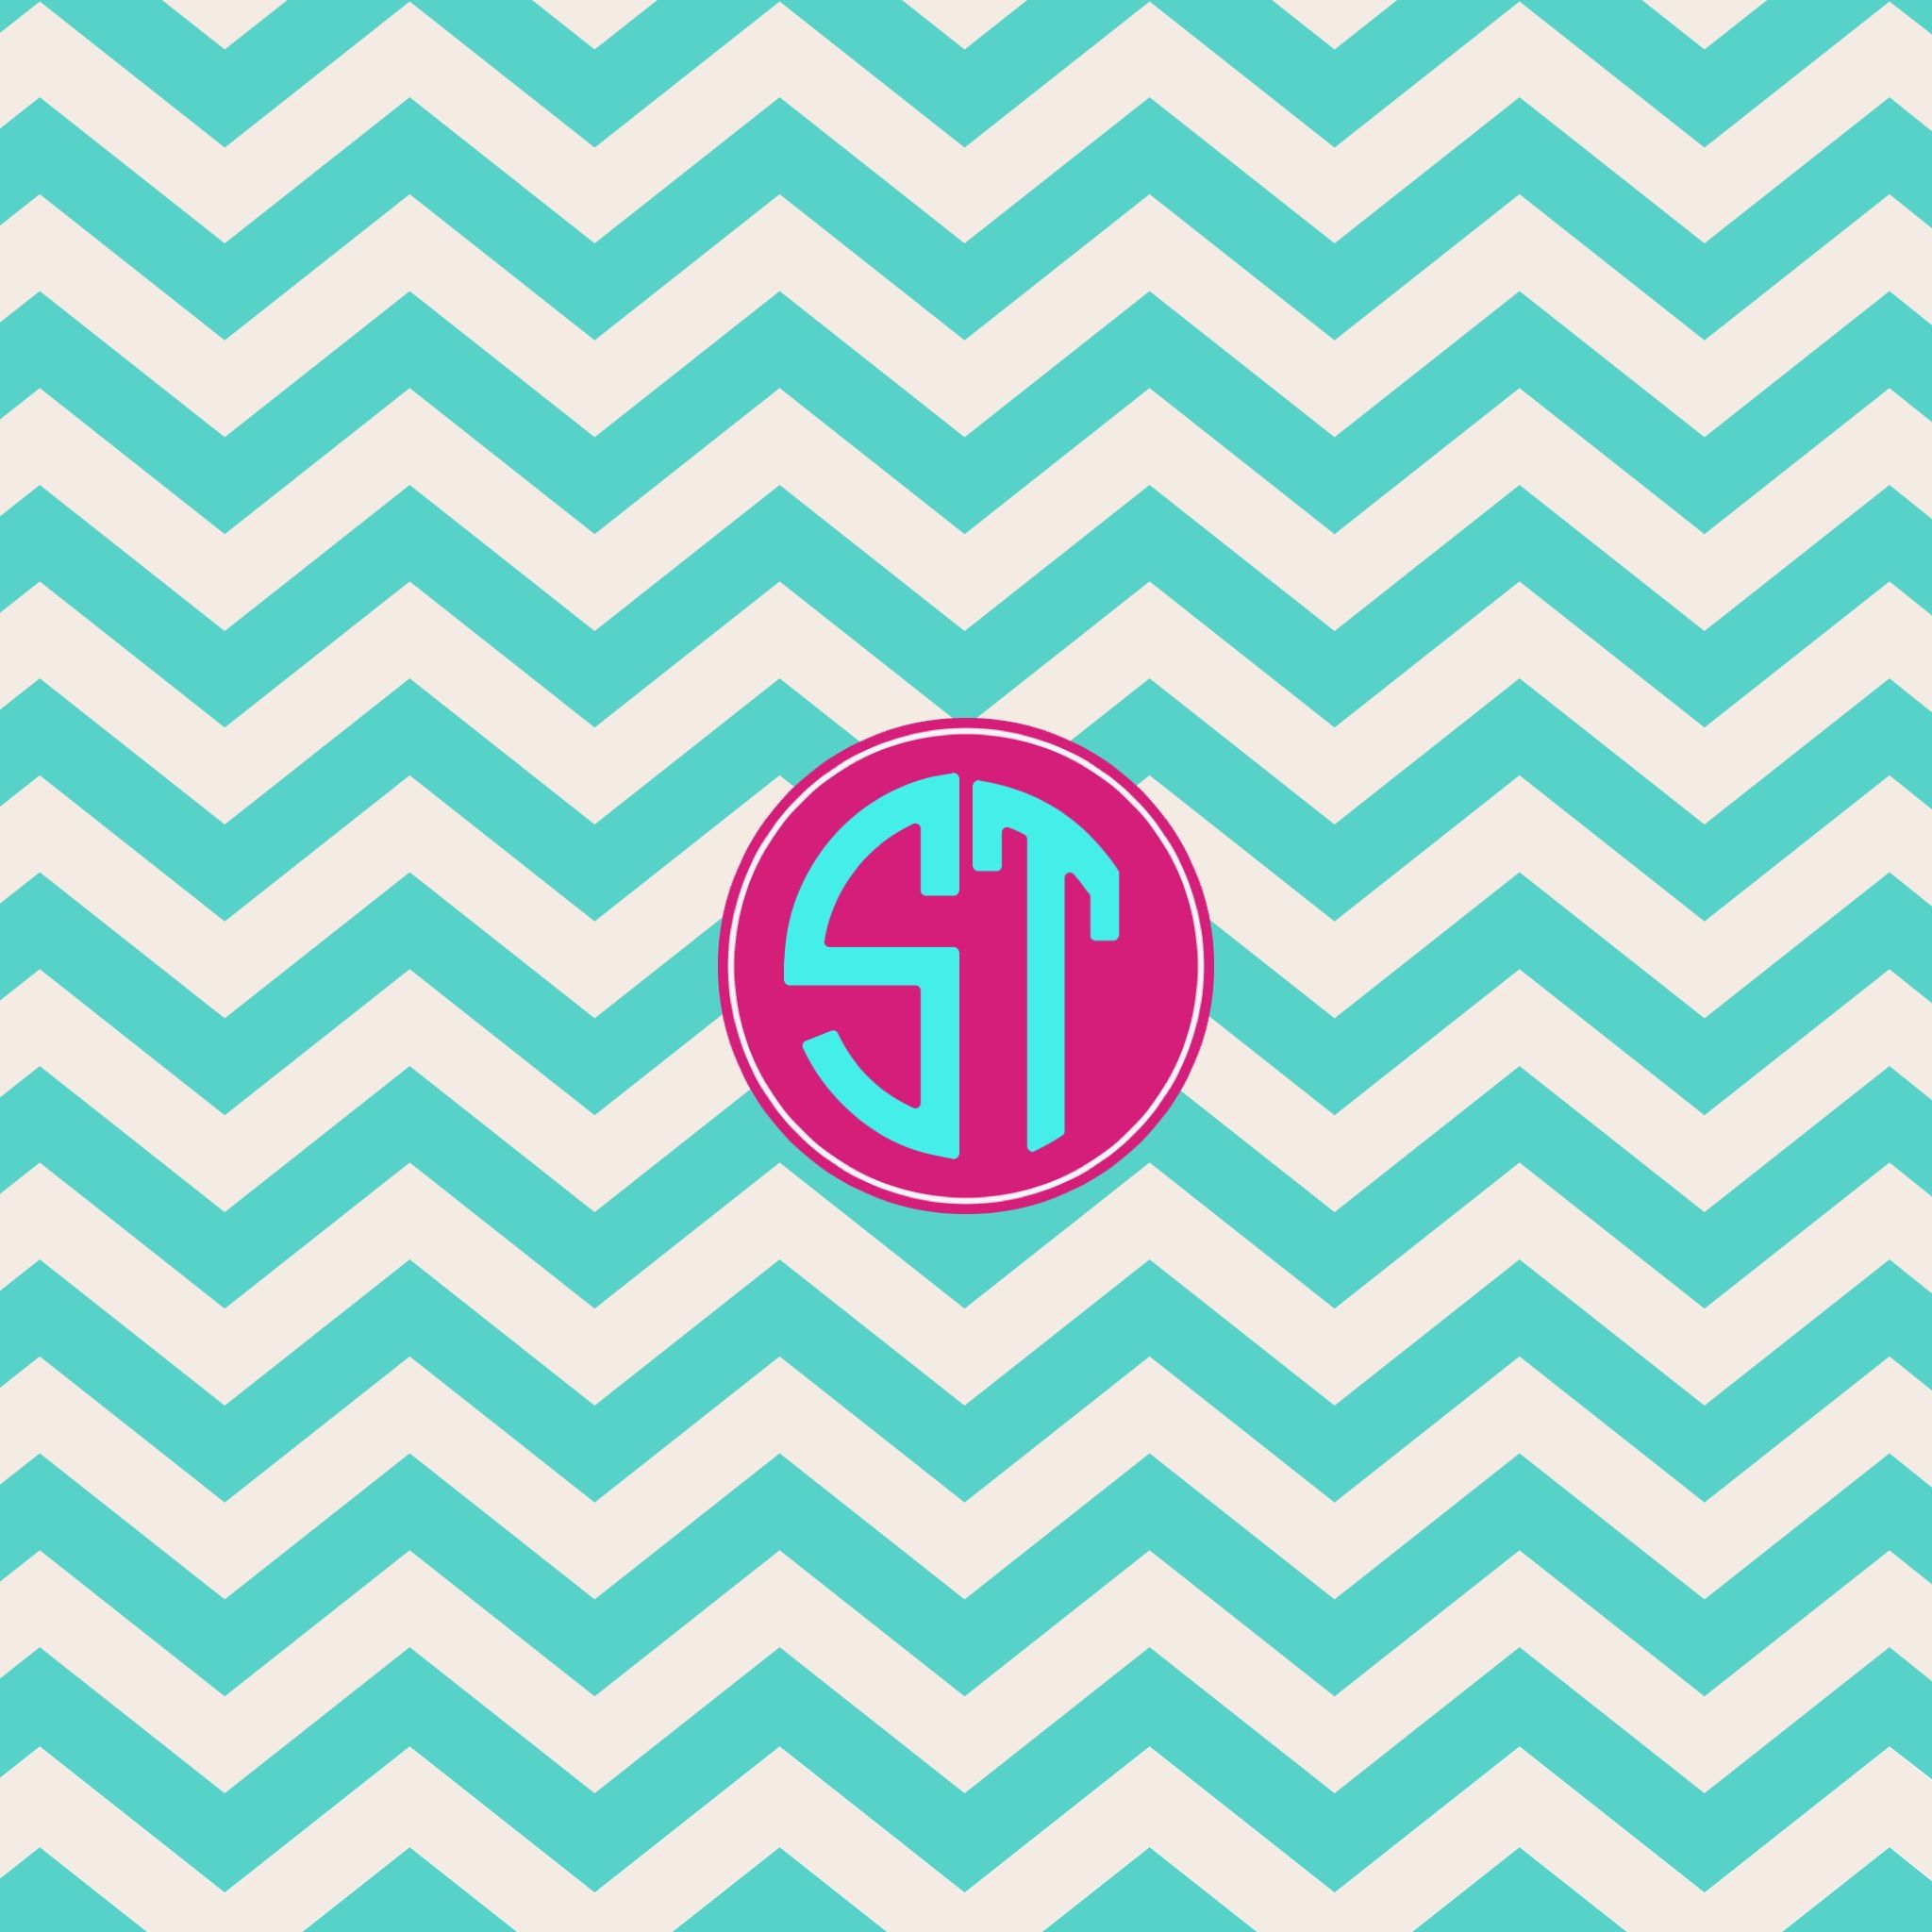 Monogram Wallpapers HD – Set Cool Backgrounds & Design.s With Initials And  Monograms, Apps